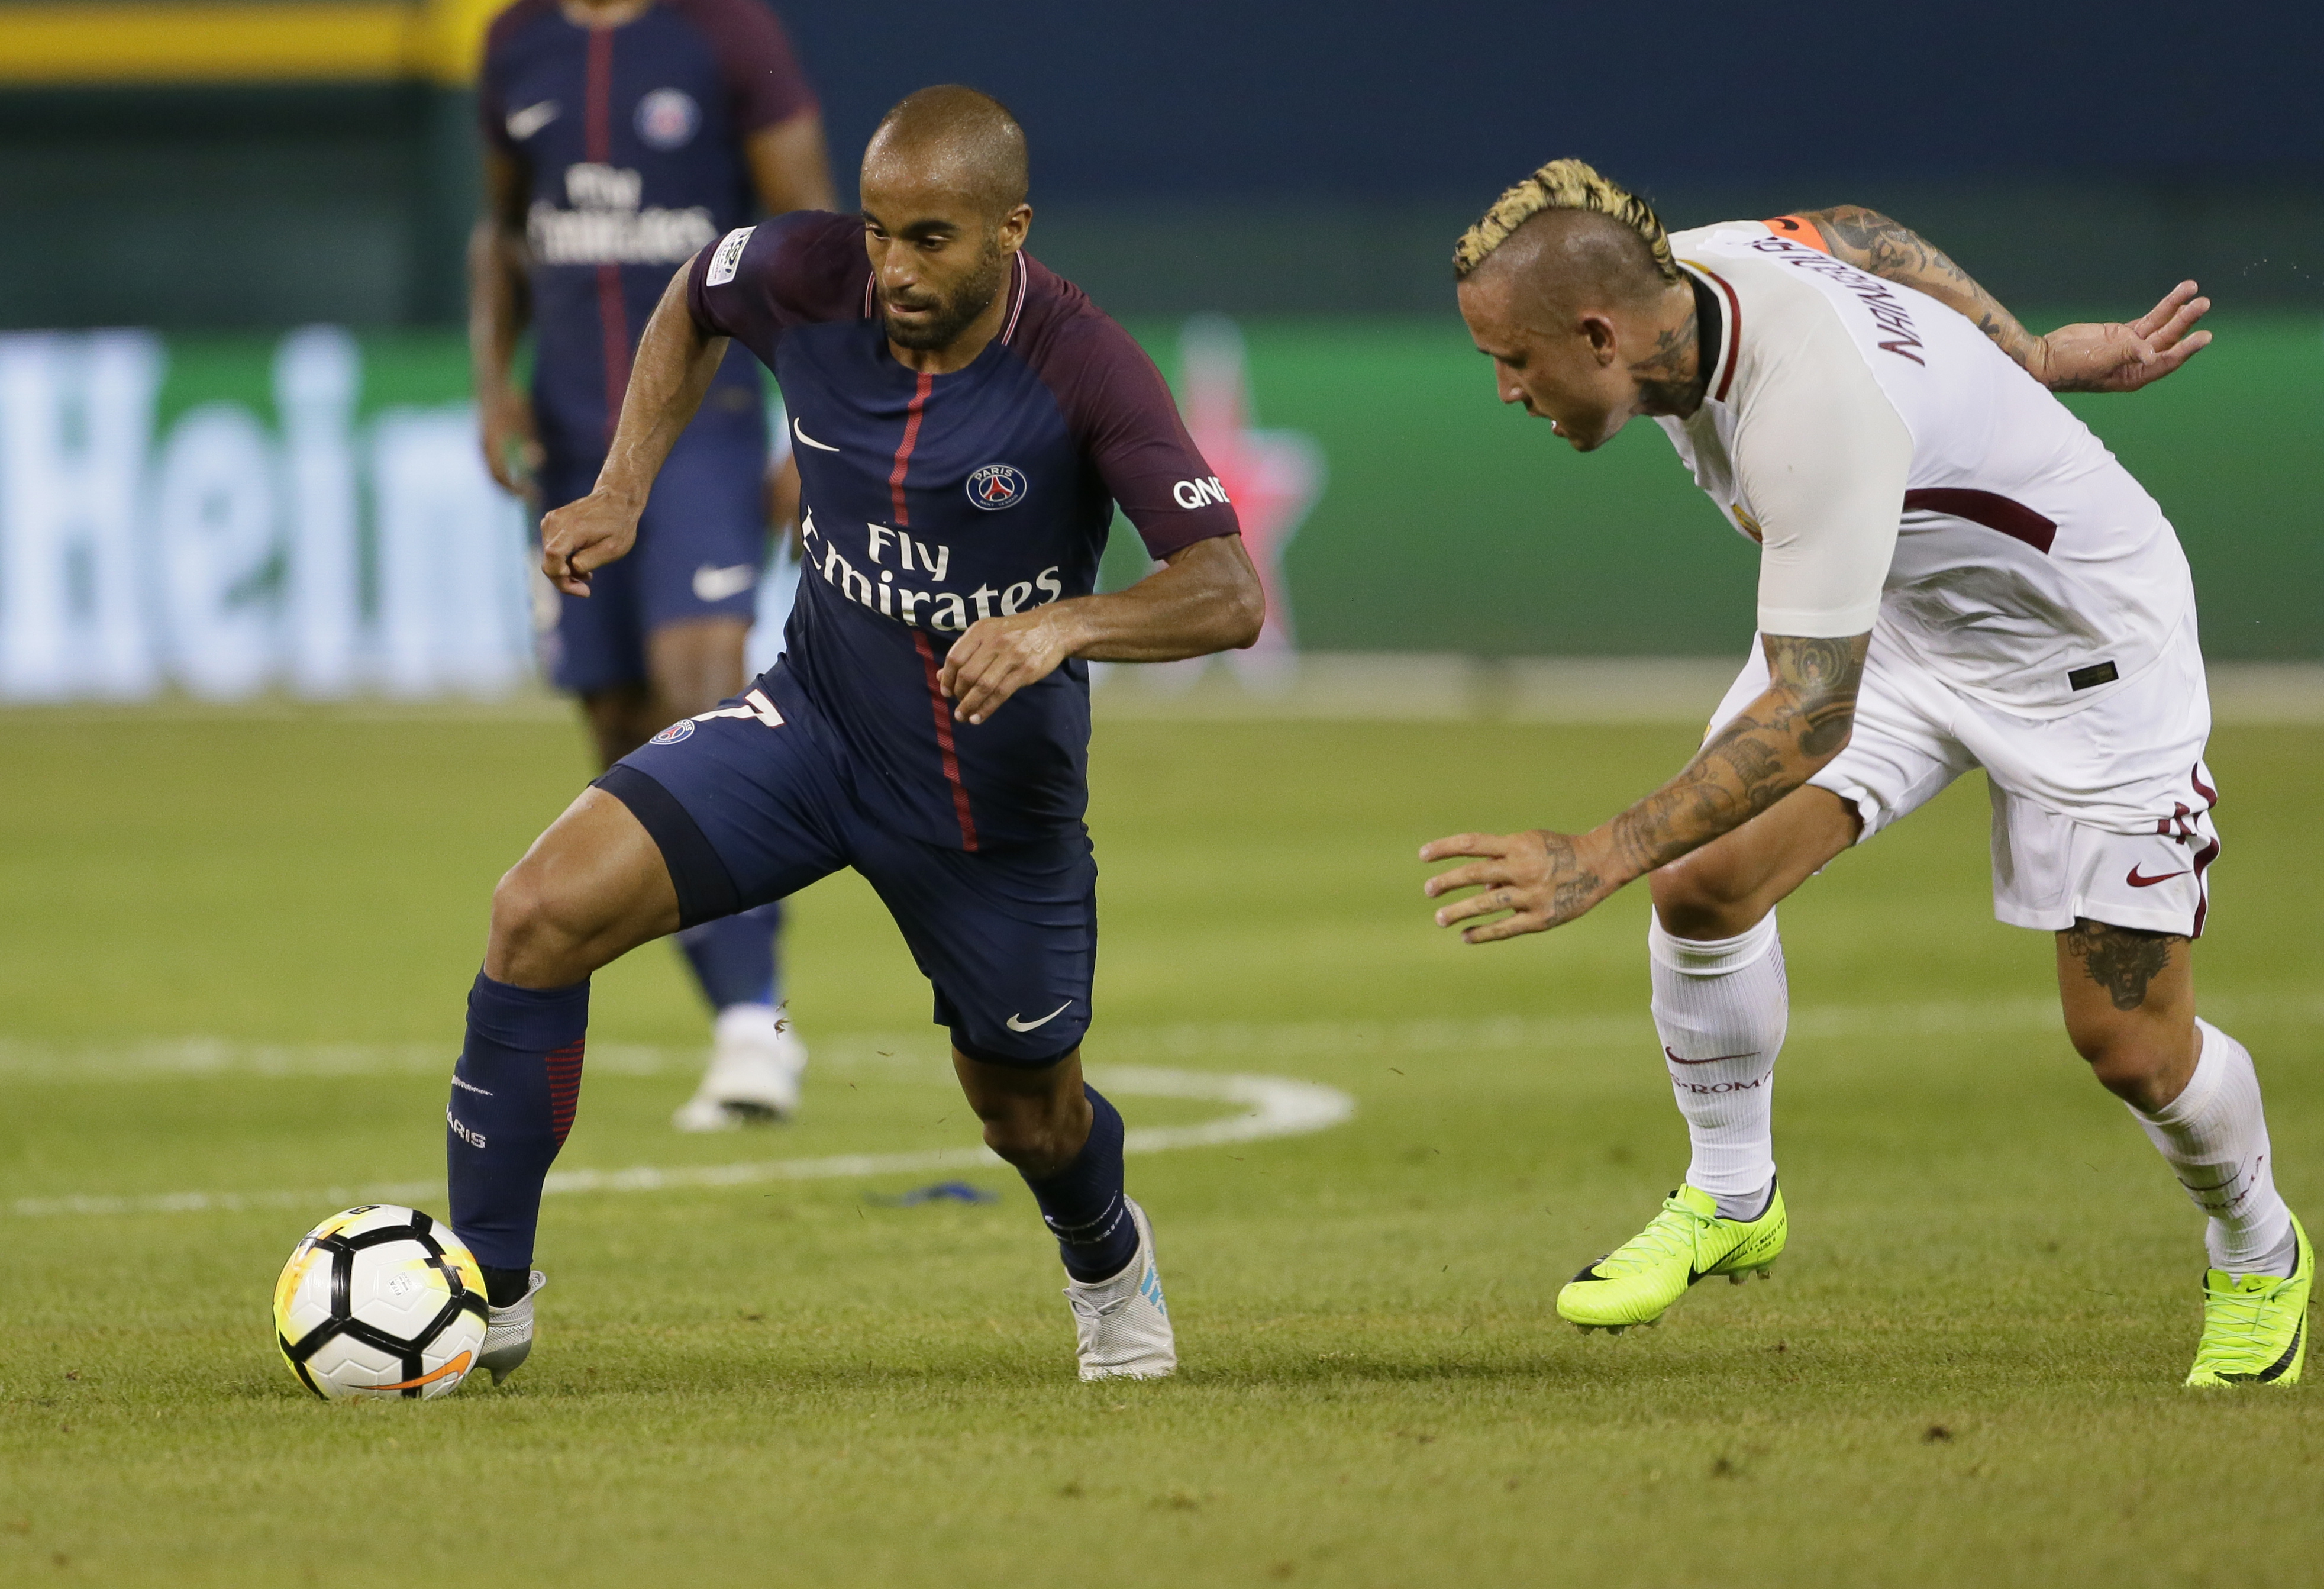 DETROIT, MI - JULY 19:  Lucas Moura #7 of Paris Saint-Germain tries to break away from Radja Nainggolan #4 of AS Roma during the second half at Comerica Park on July 19, 2017 in Detroit, Michigan. (Photo by Duane Burleson/Getty Images)